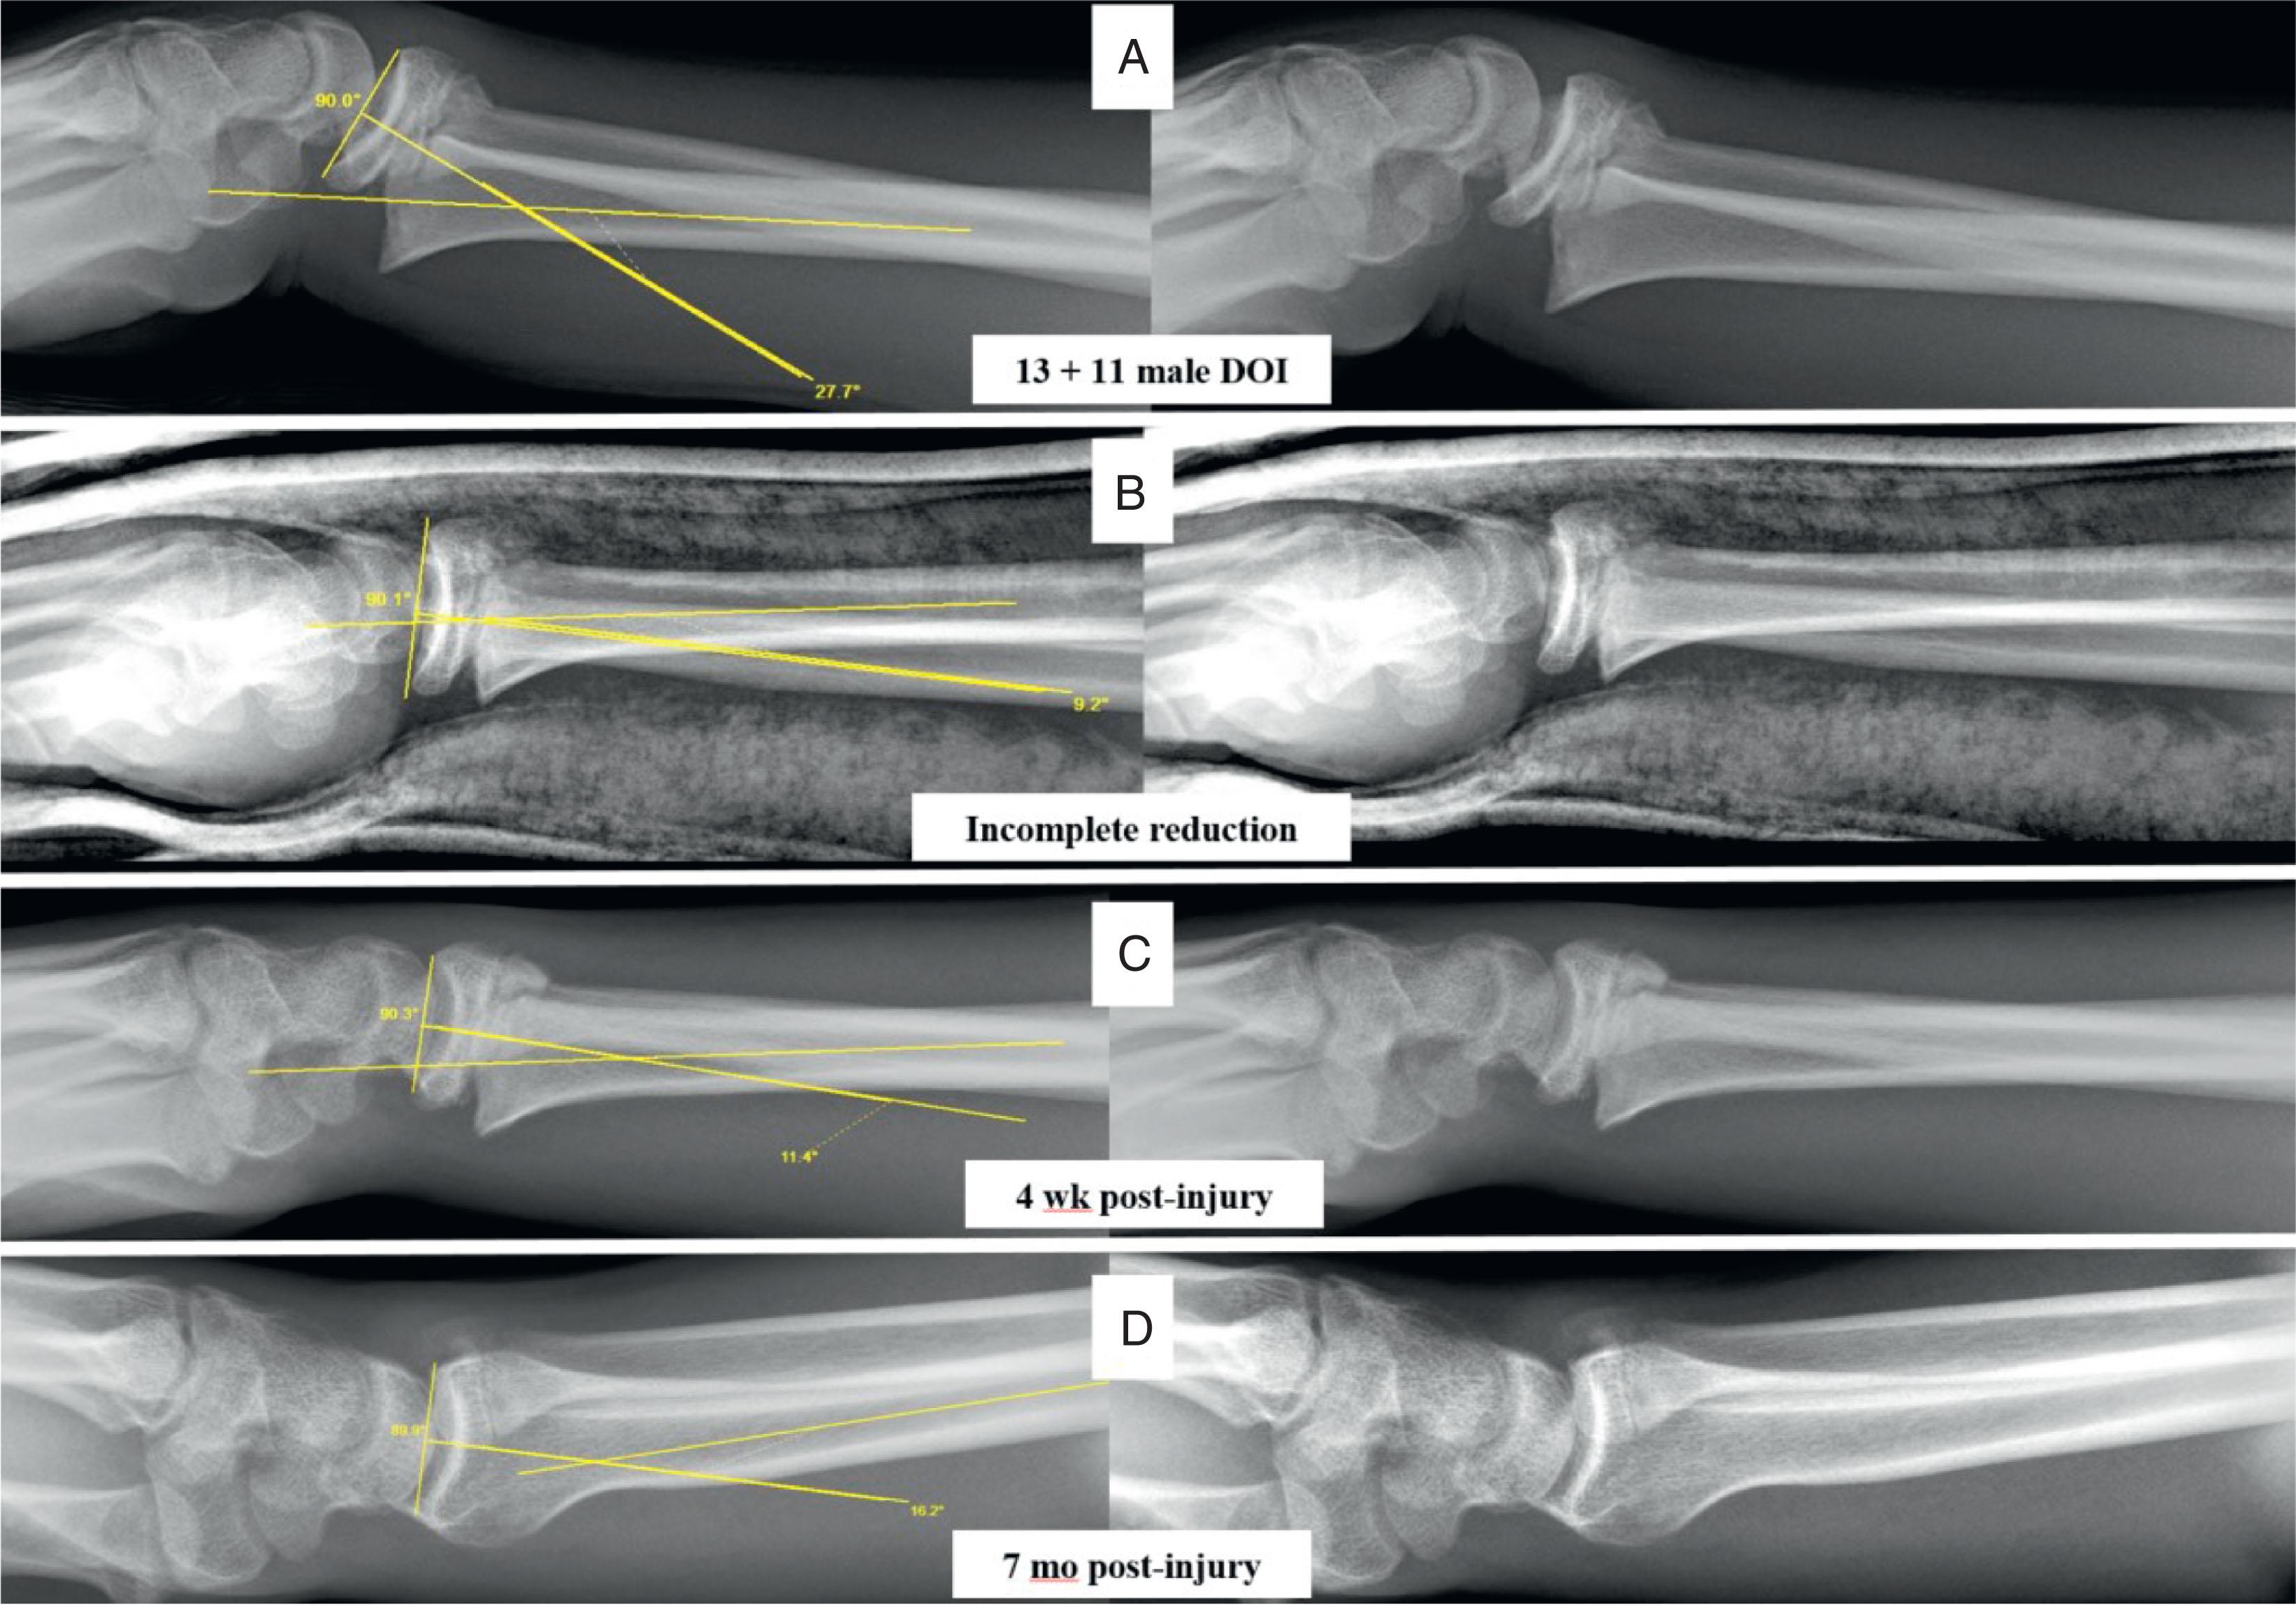 Fig. 6.14, Unreliable Remodeling Potential Following Distal Radius Growth Plate Fracture in Teenager. (A) Initial sagittal displacement with nearly 30 degrees of angulation. (B) Reduction decreased angulation to about 10 degrees. (C) Some increase in angulation at fracture healing. (D) Physis closed and 15-degree apex volar angulation a short time later.